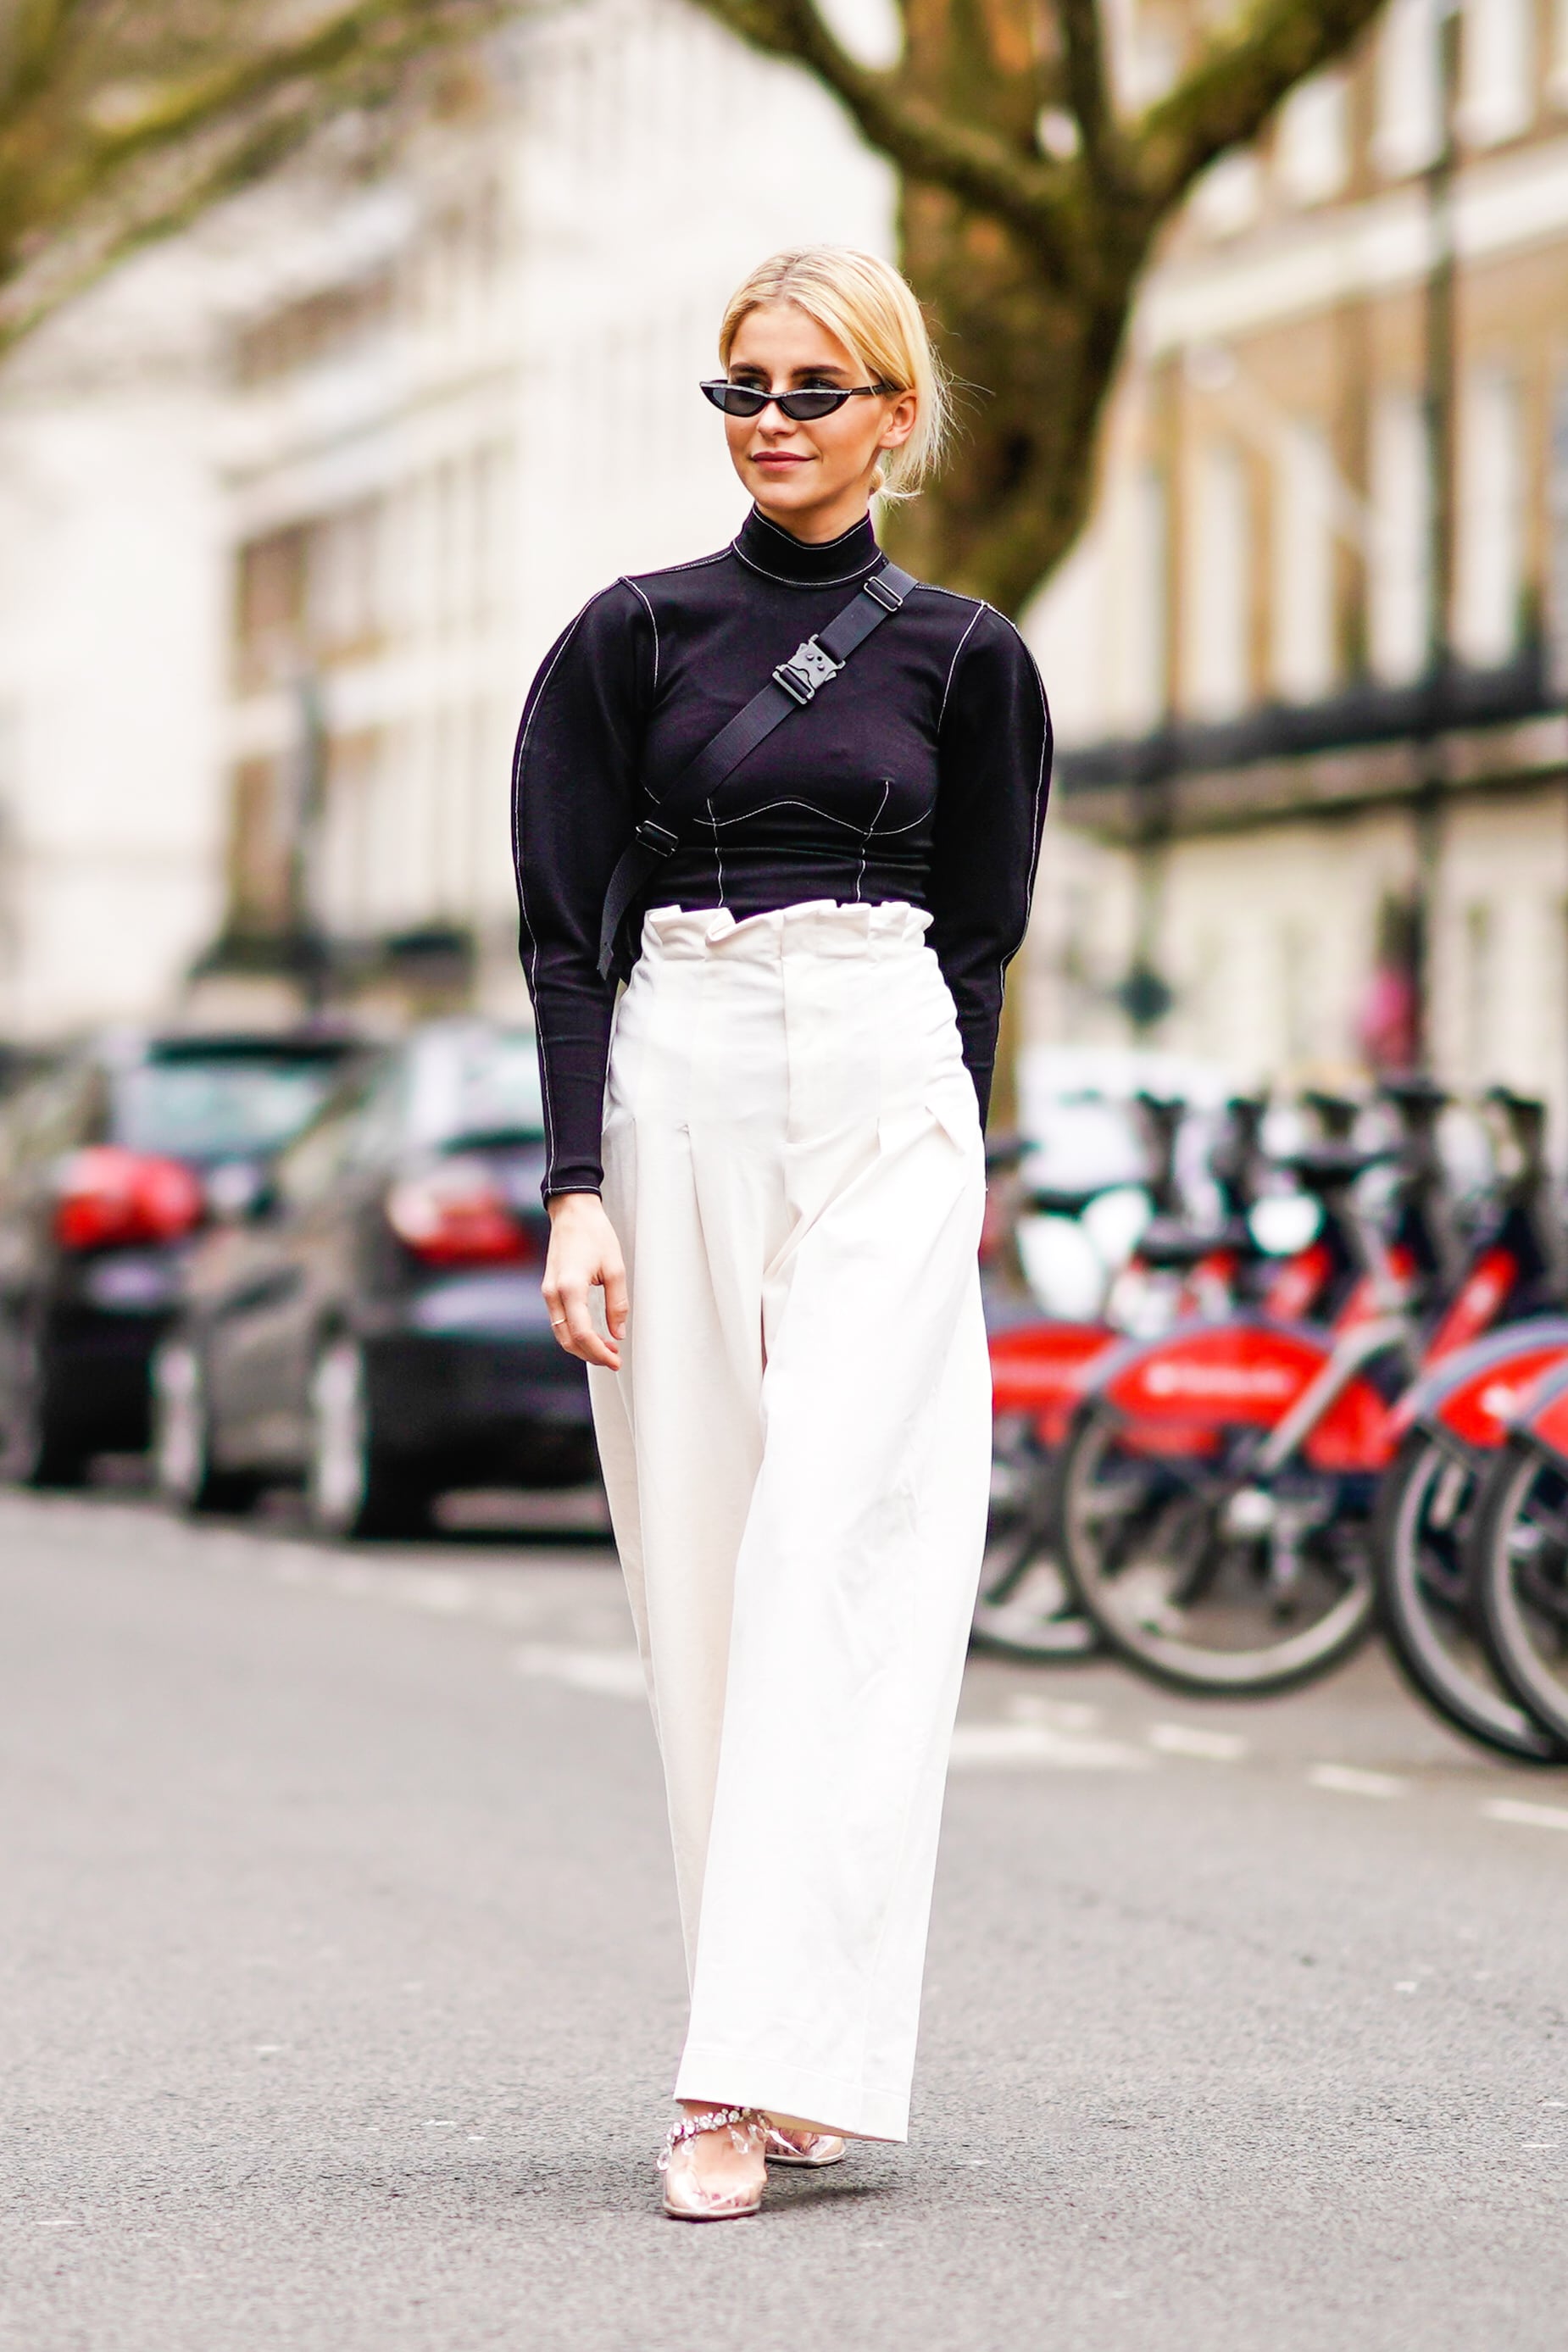 Ruffled HighWaist Trousers  35 Pant Outfit Ideas That  Gasp  Arent  Jeans  POPSUGAR Fashion Middle East Photo 19